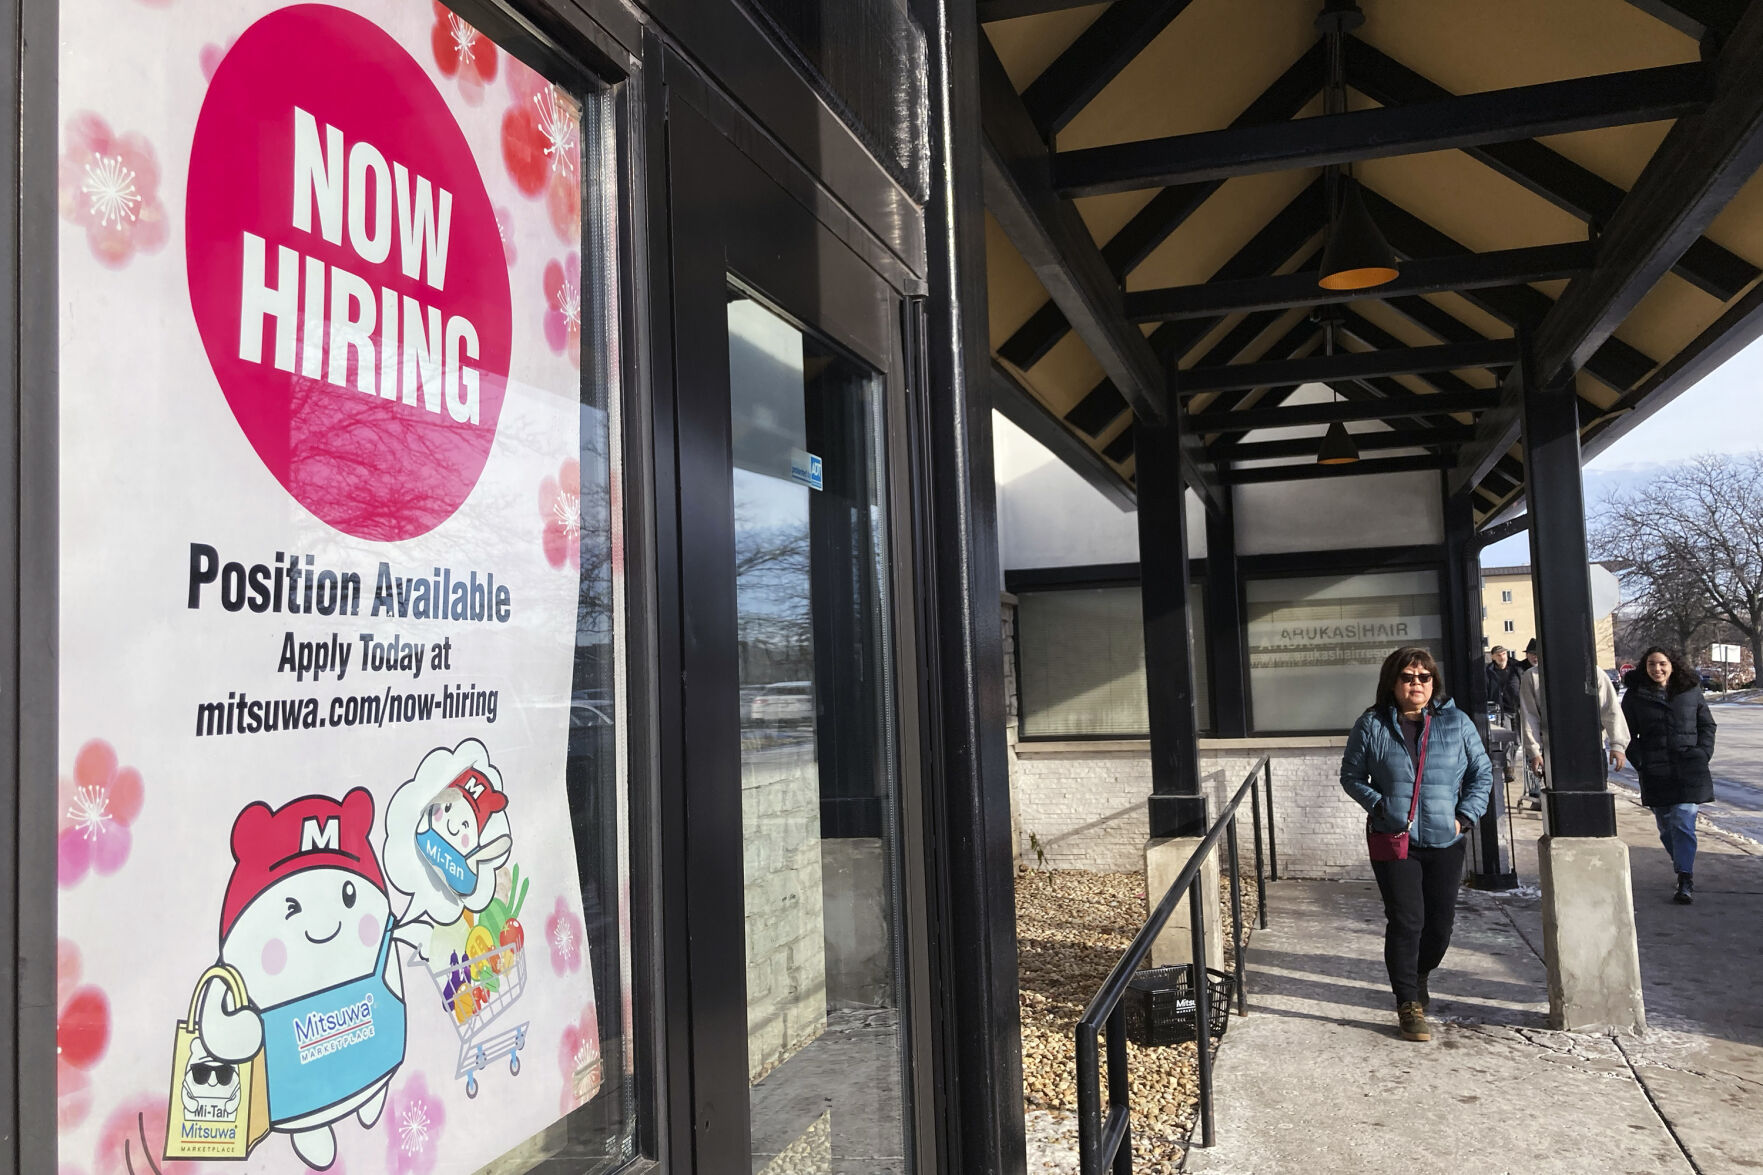 <p>File - A hiring sign is displayed at a grocery store in Arlington Heights, Ill., Tuesday, Dec. 27, 2022. On Thursday, the Labor Department reports on the number of people who applied for unemployment benefits last week. (AP Photo/Nam Y. Huh, File)</p>   PHOTO CREDIT: Nam Y. Huh 